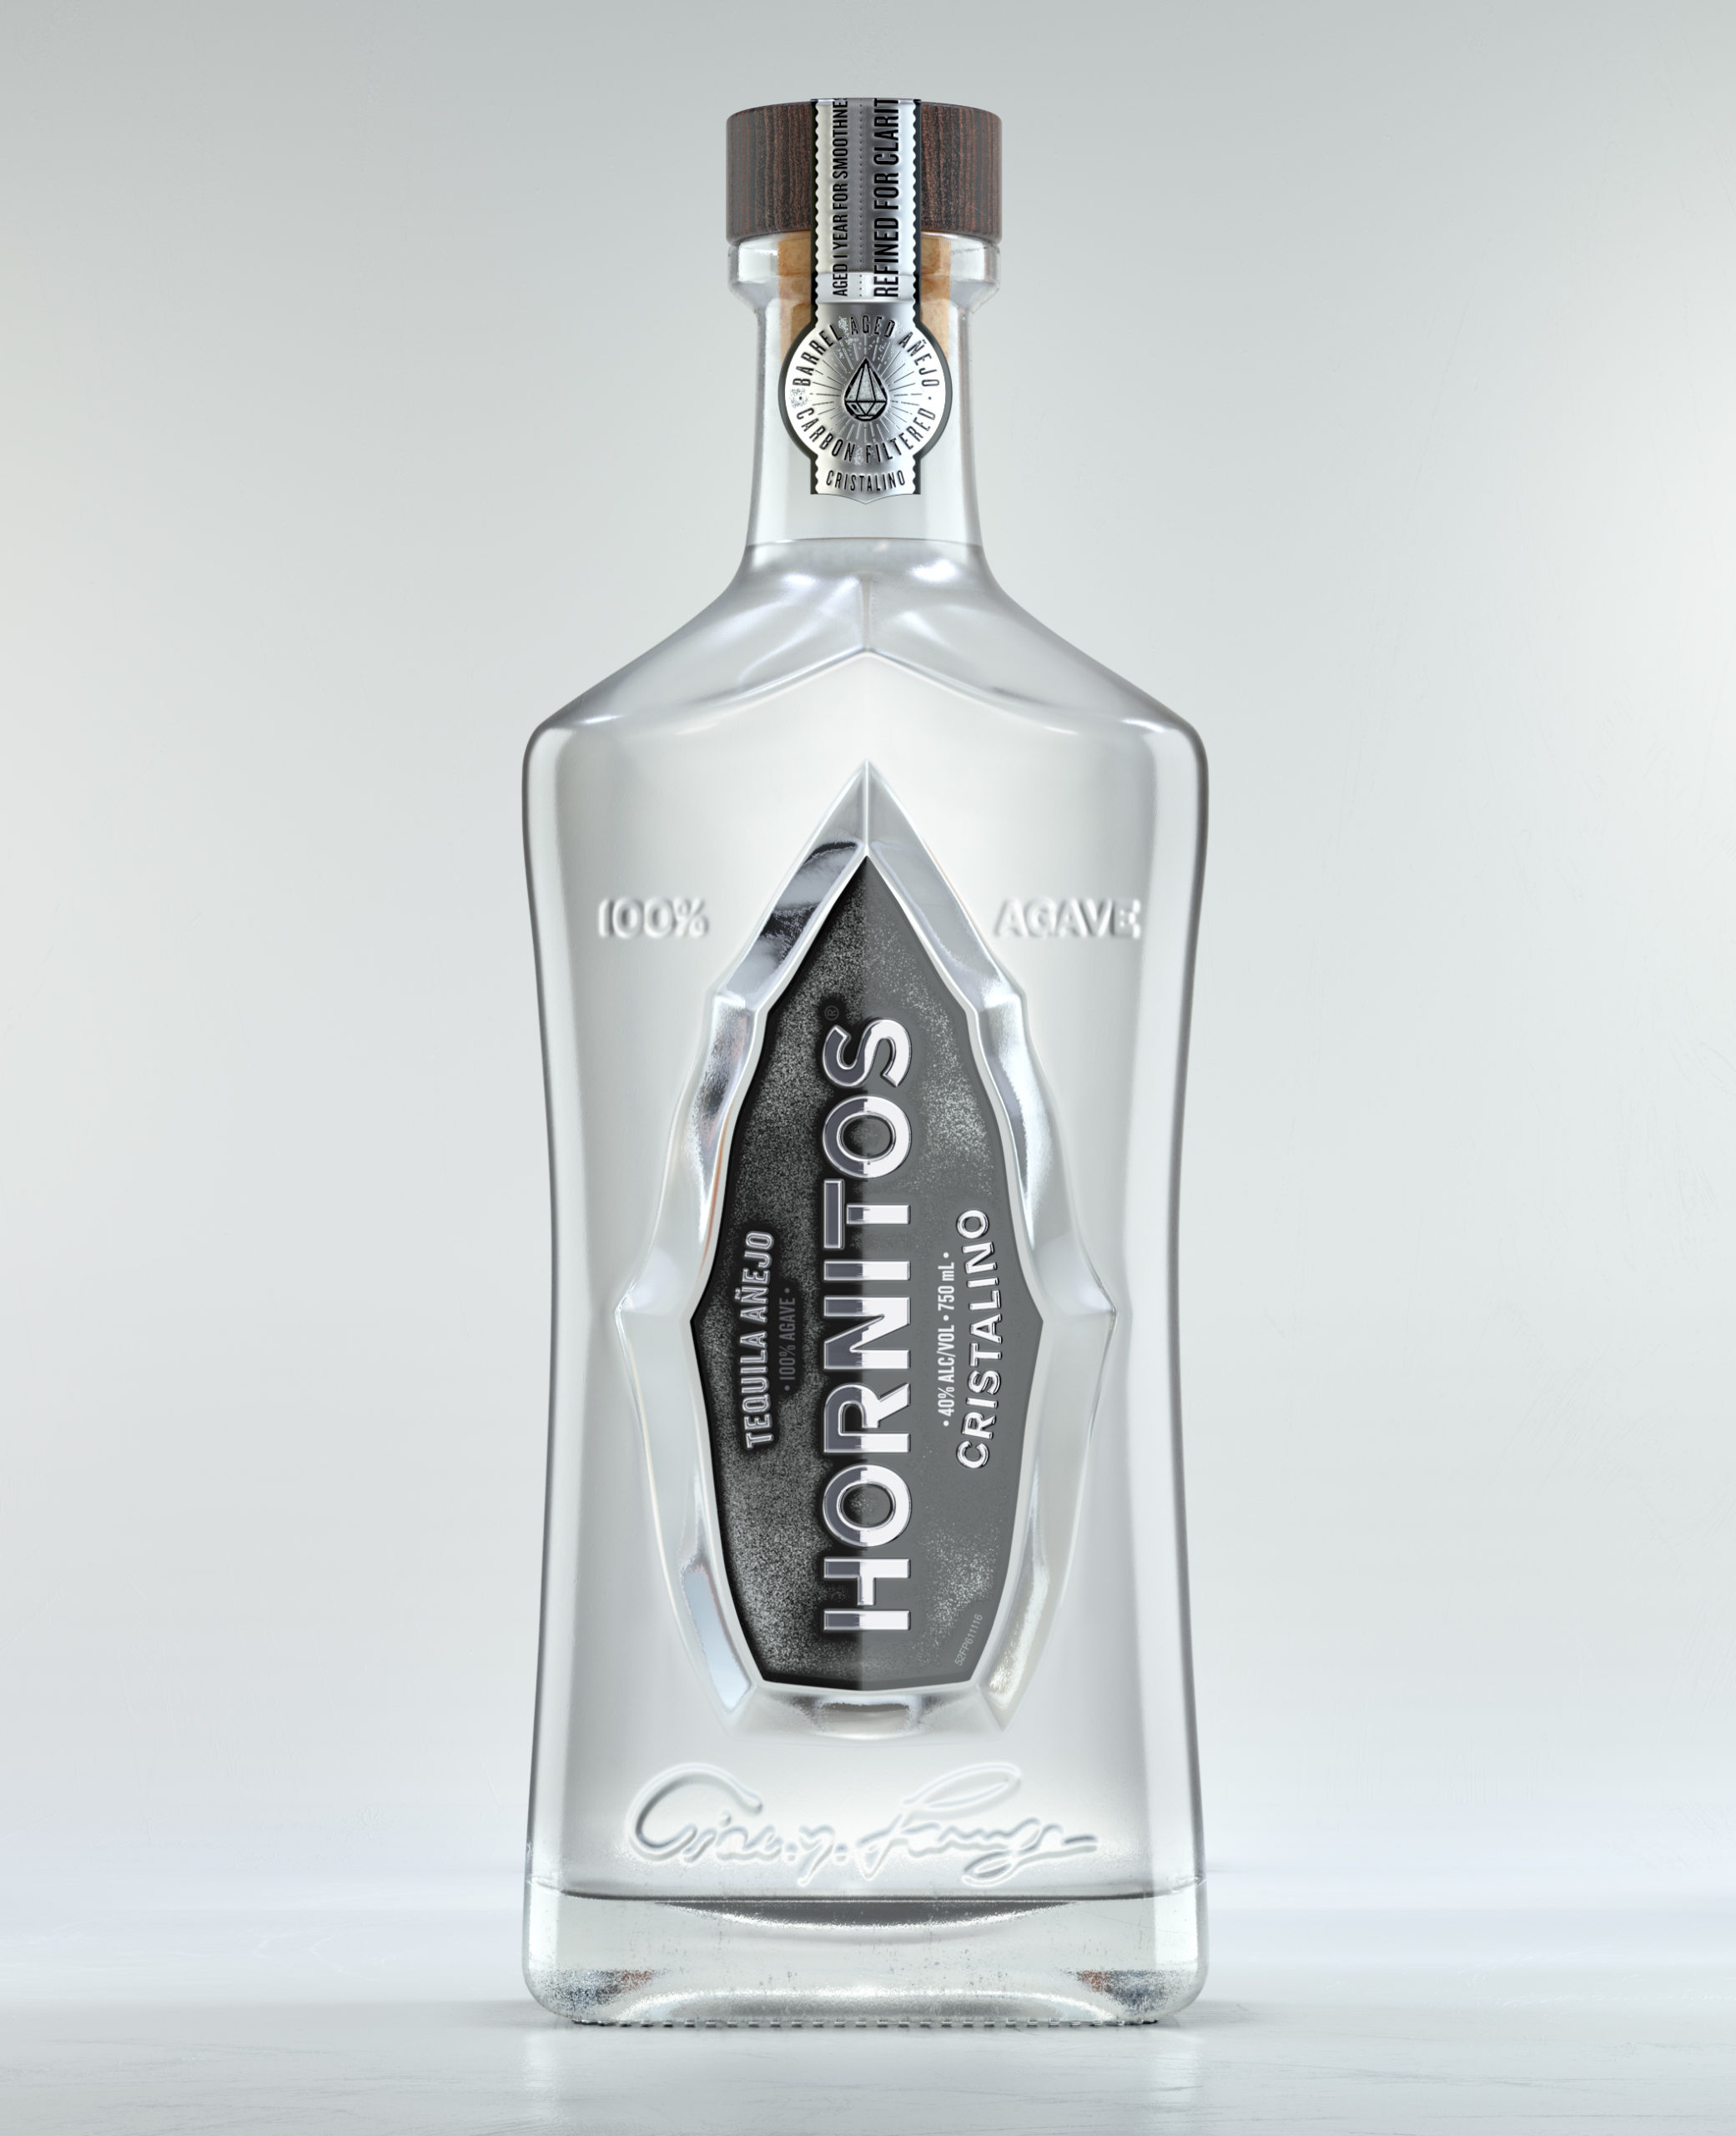 CGI - Modeling and rendering of alcohol bottle